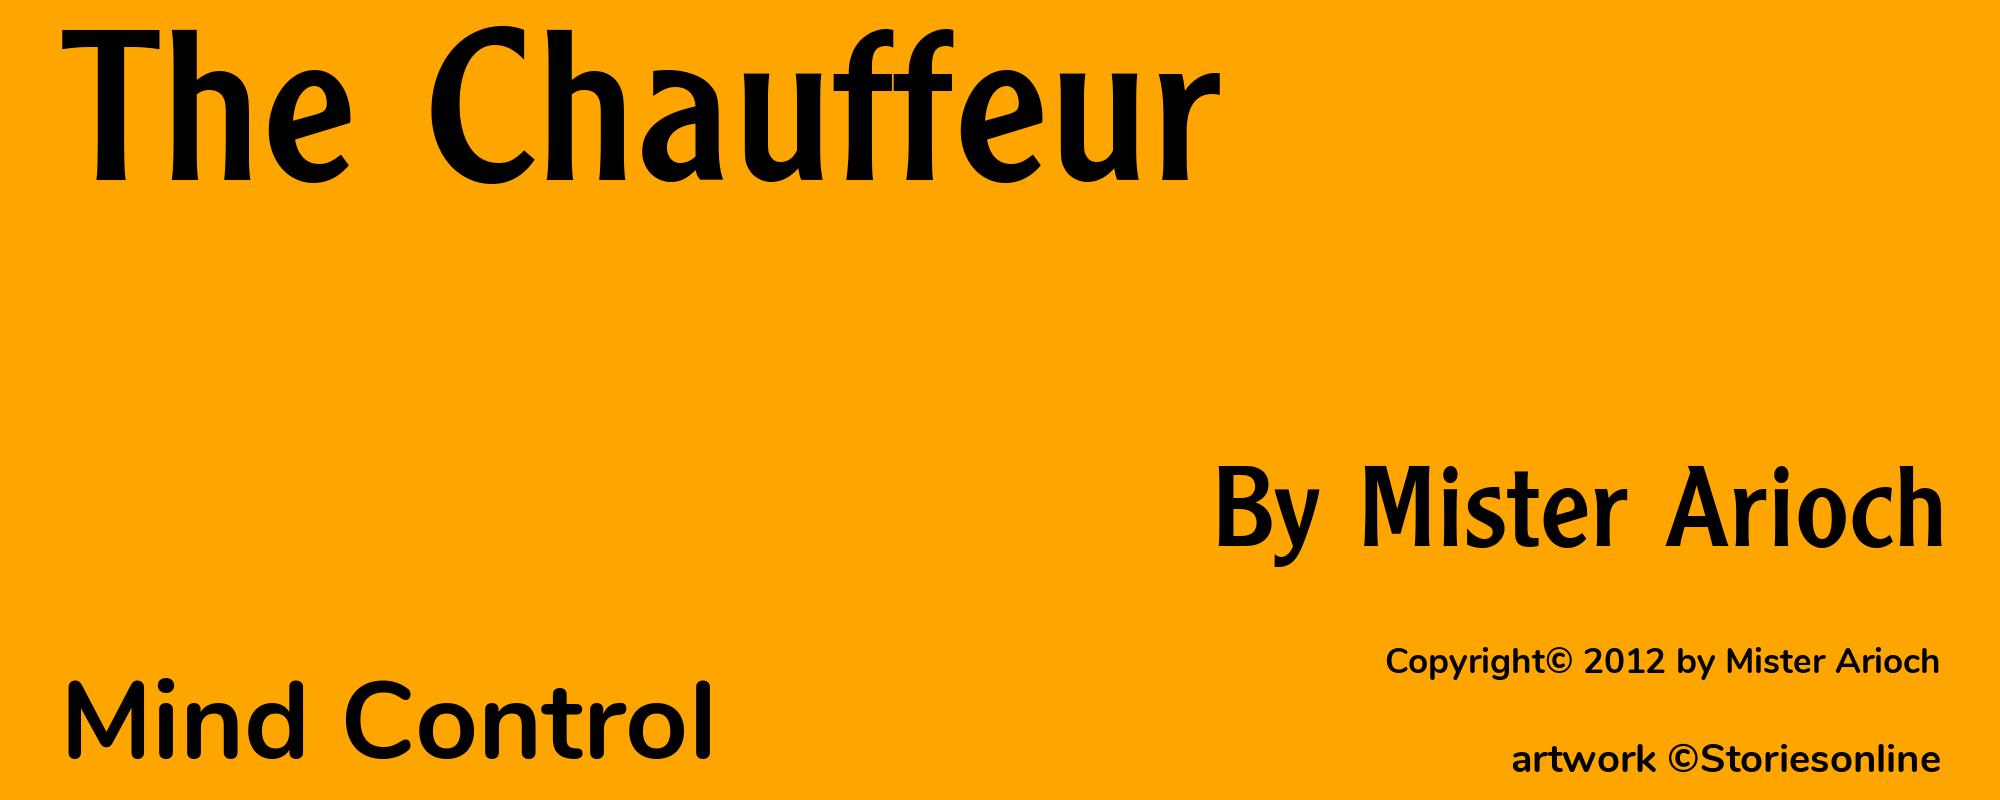 The Chauffeur - Cover